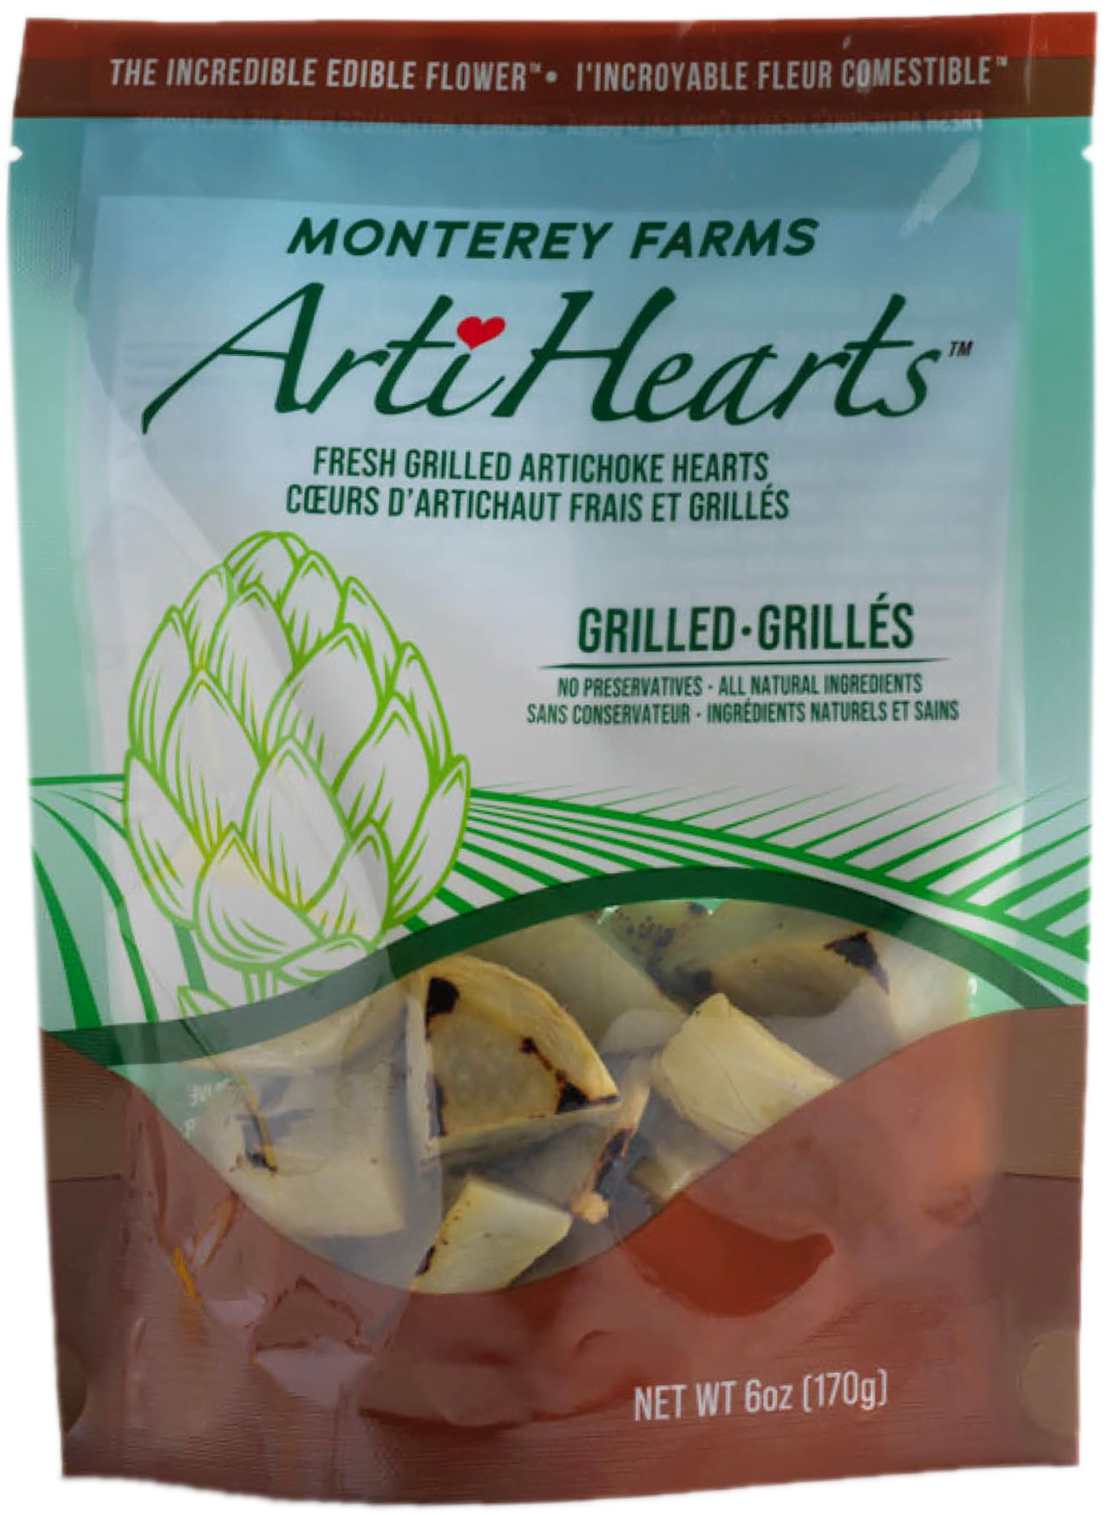 Grilled ArtiHearts